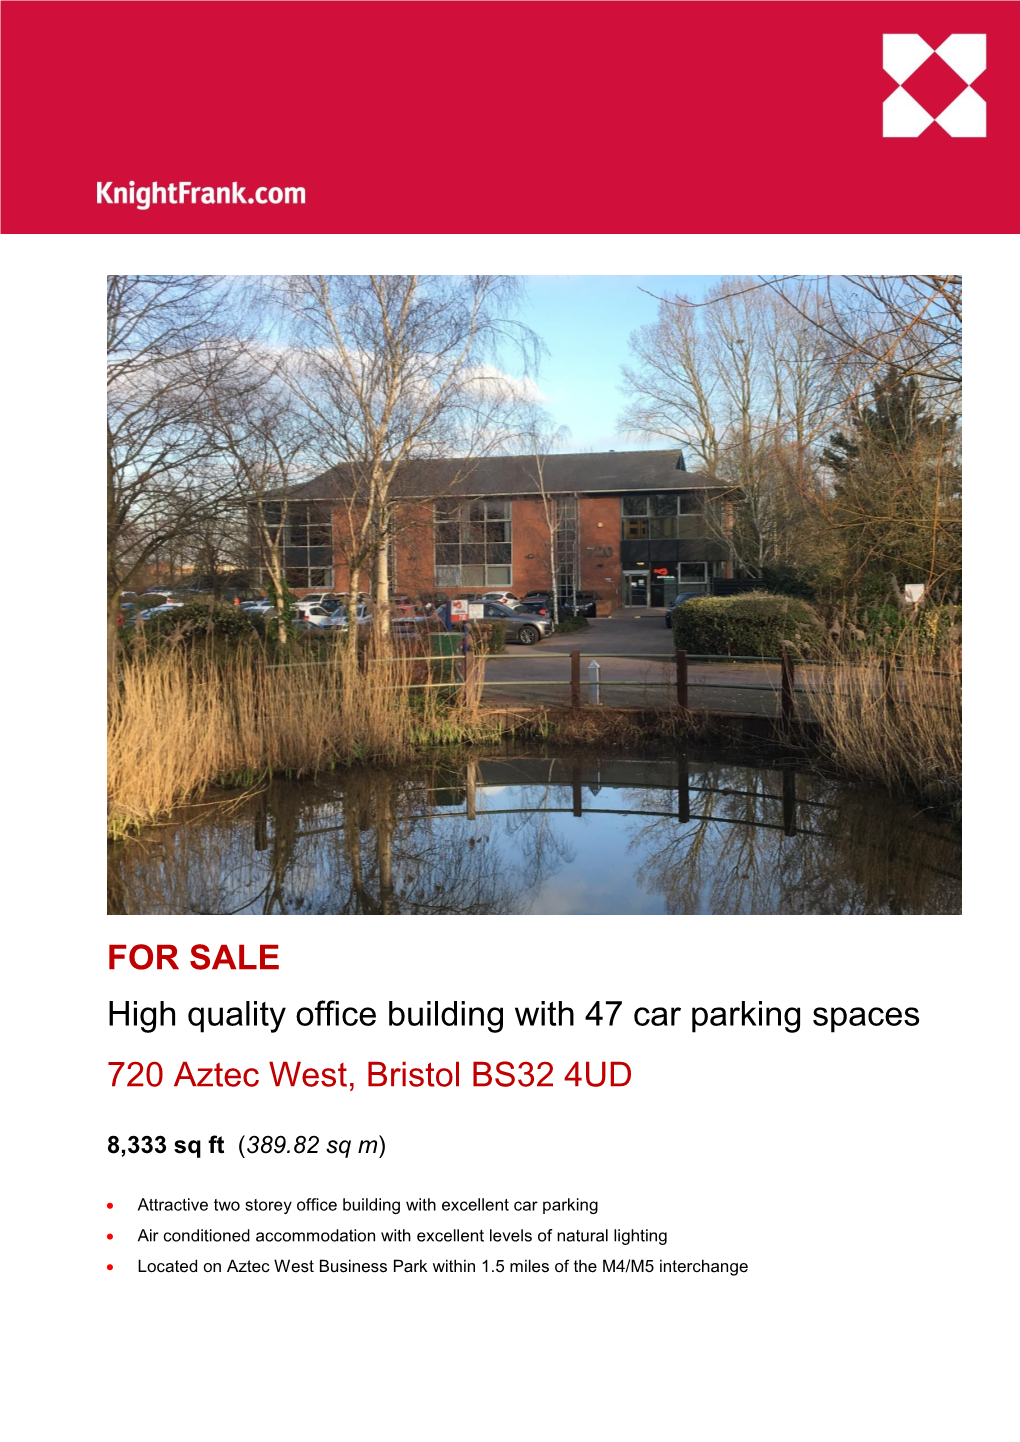 FOR SALE High Quality Office Building with 47 Car Parking Spaces 720 Aztec West, Bristol BS32